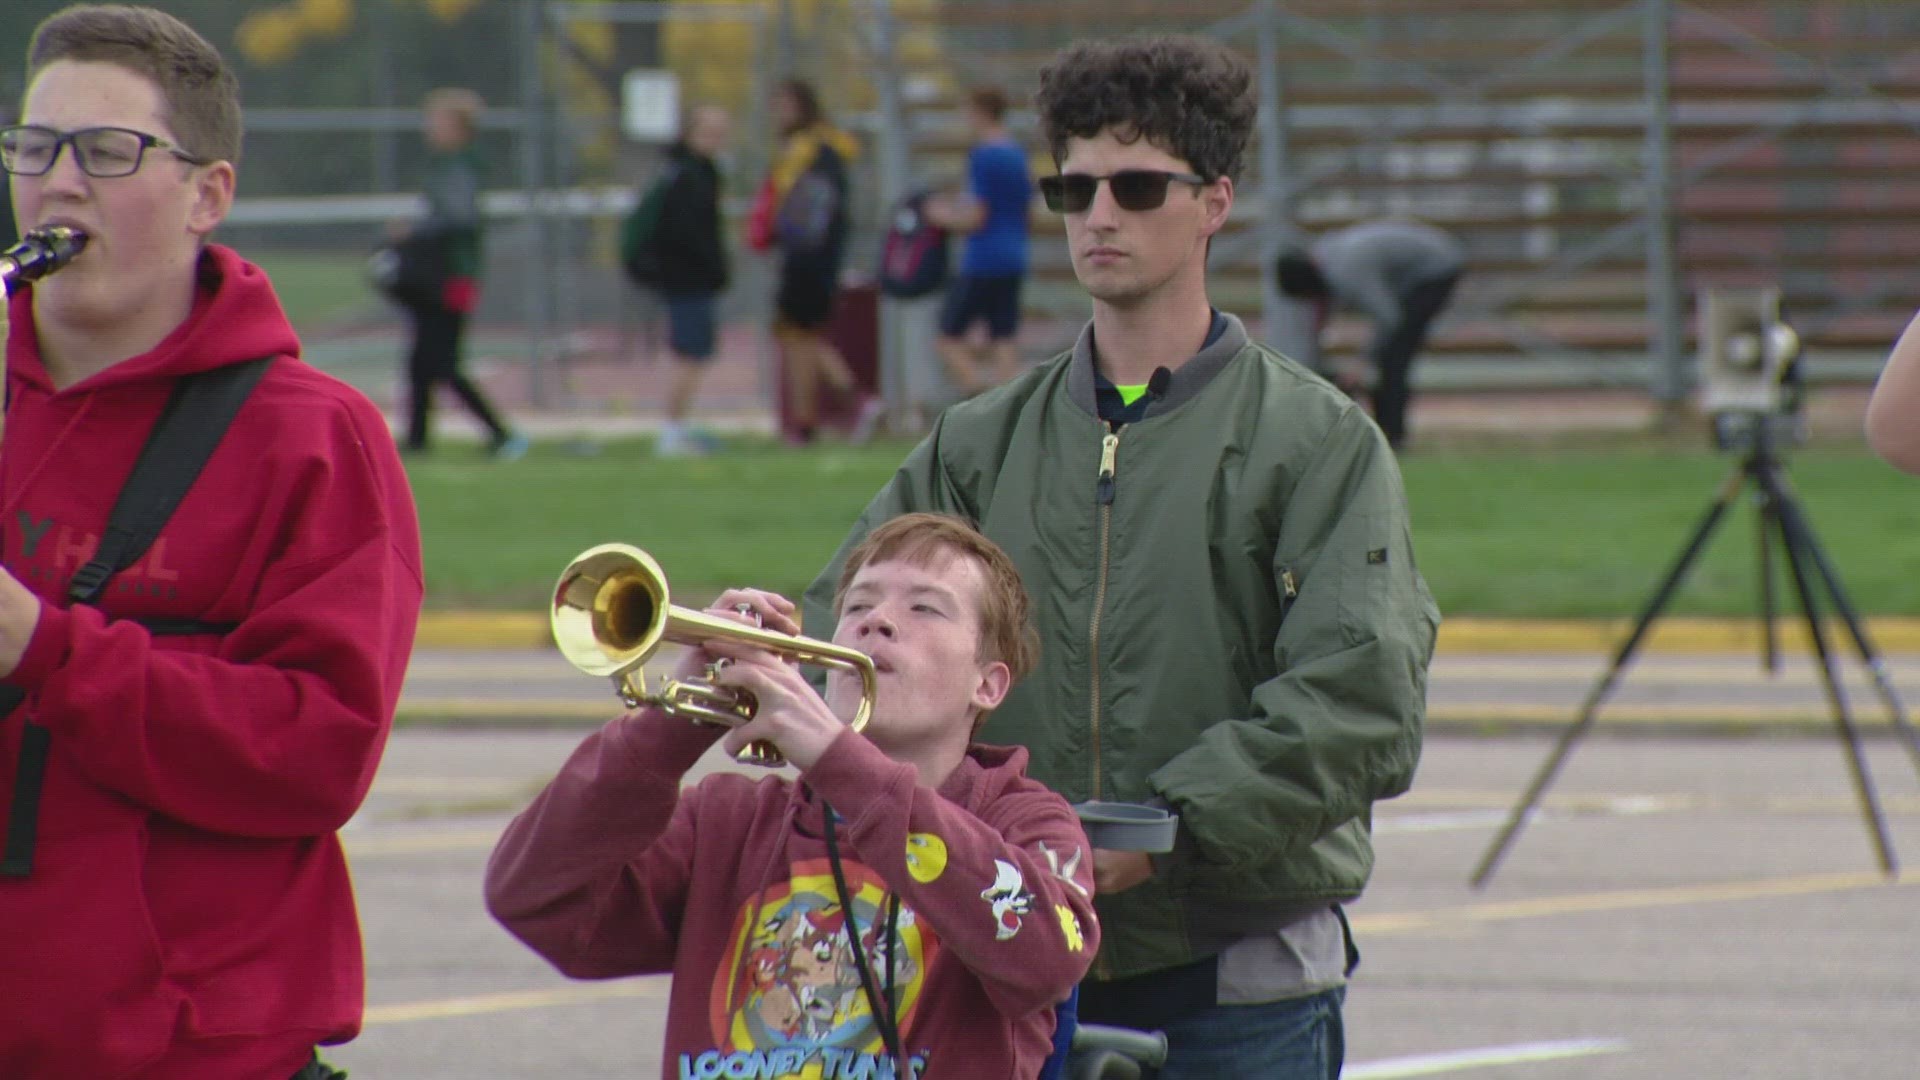 Smoky Hill High School seniors Donovan Light and Nolan Dauer overcame a challenge to be able to participate in the school's marching band.